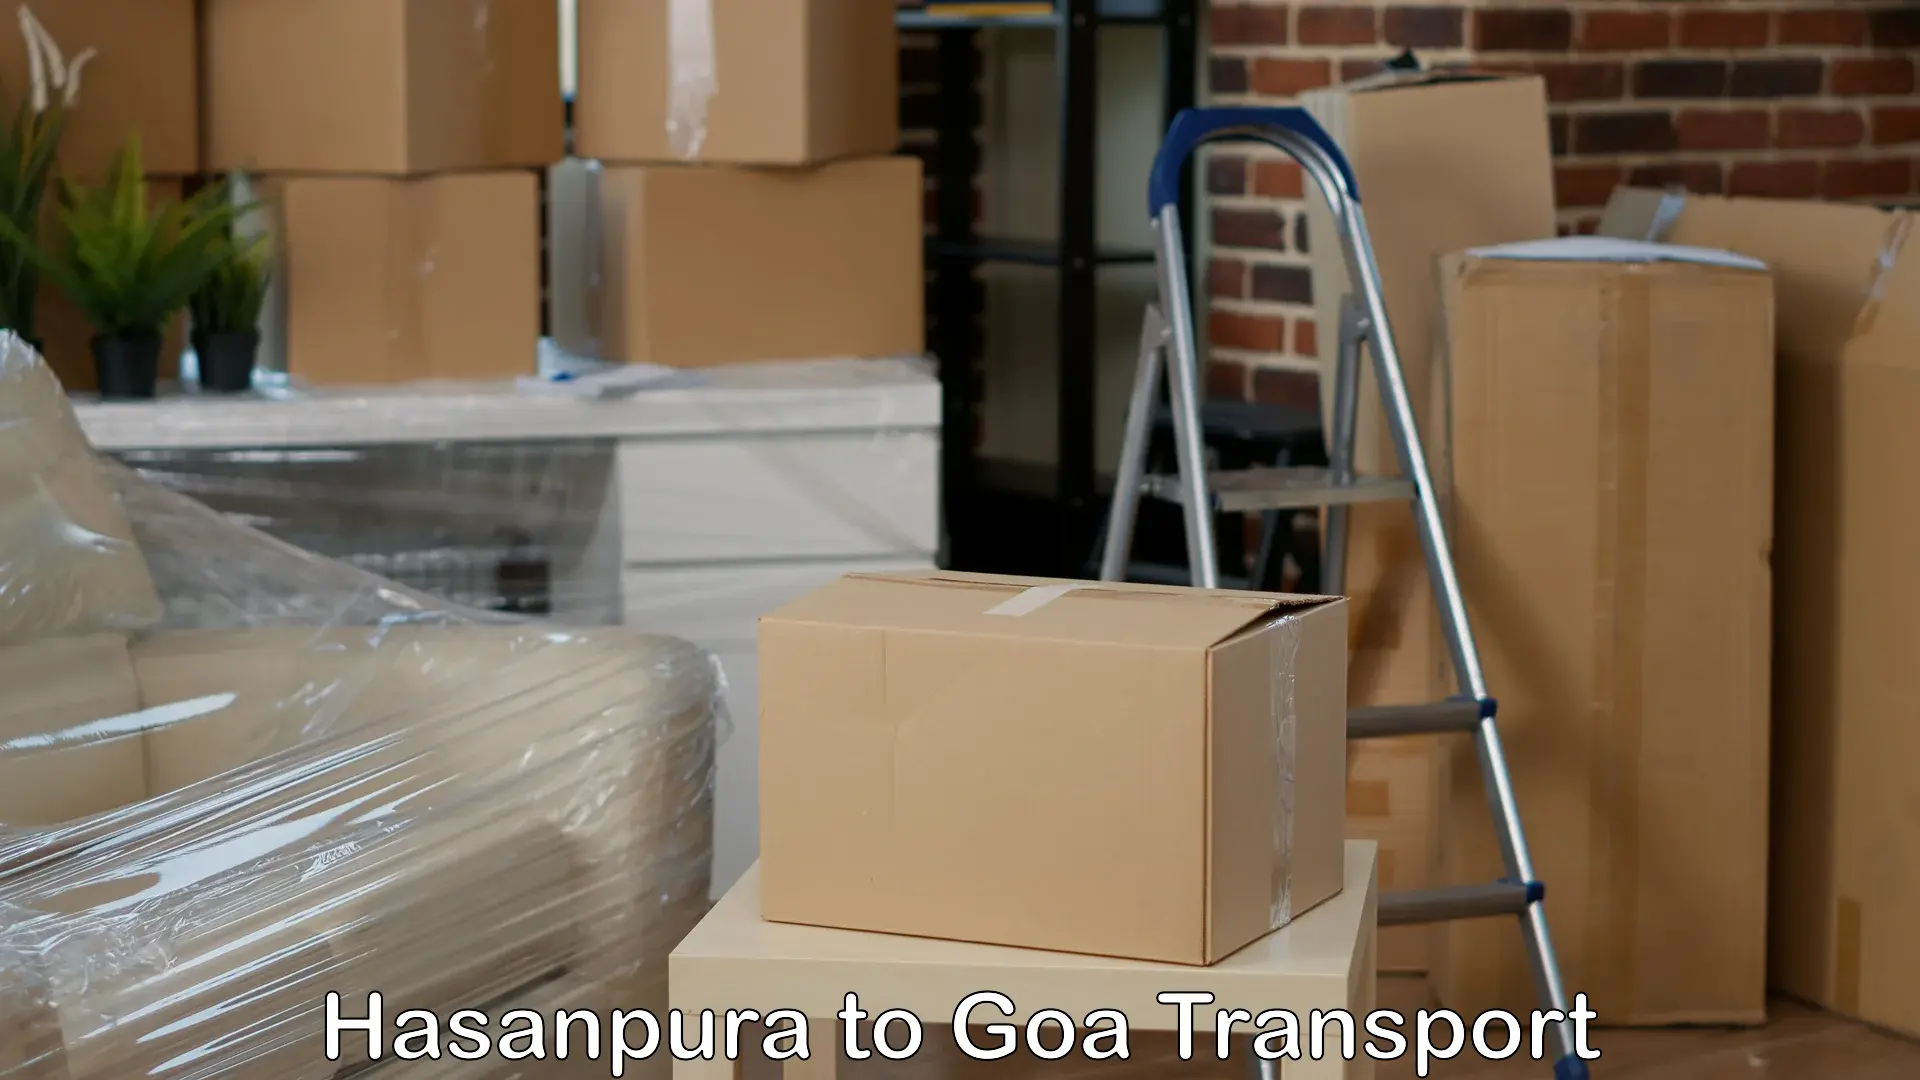 Goods delivery service Hasanpura to Goa